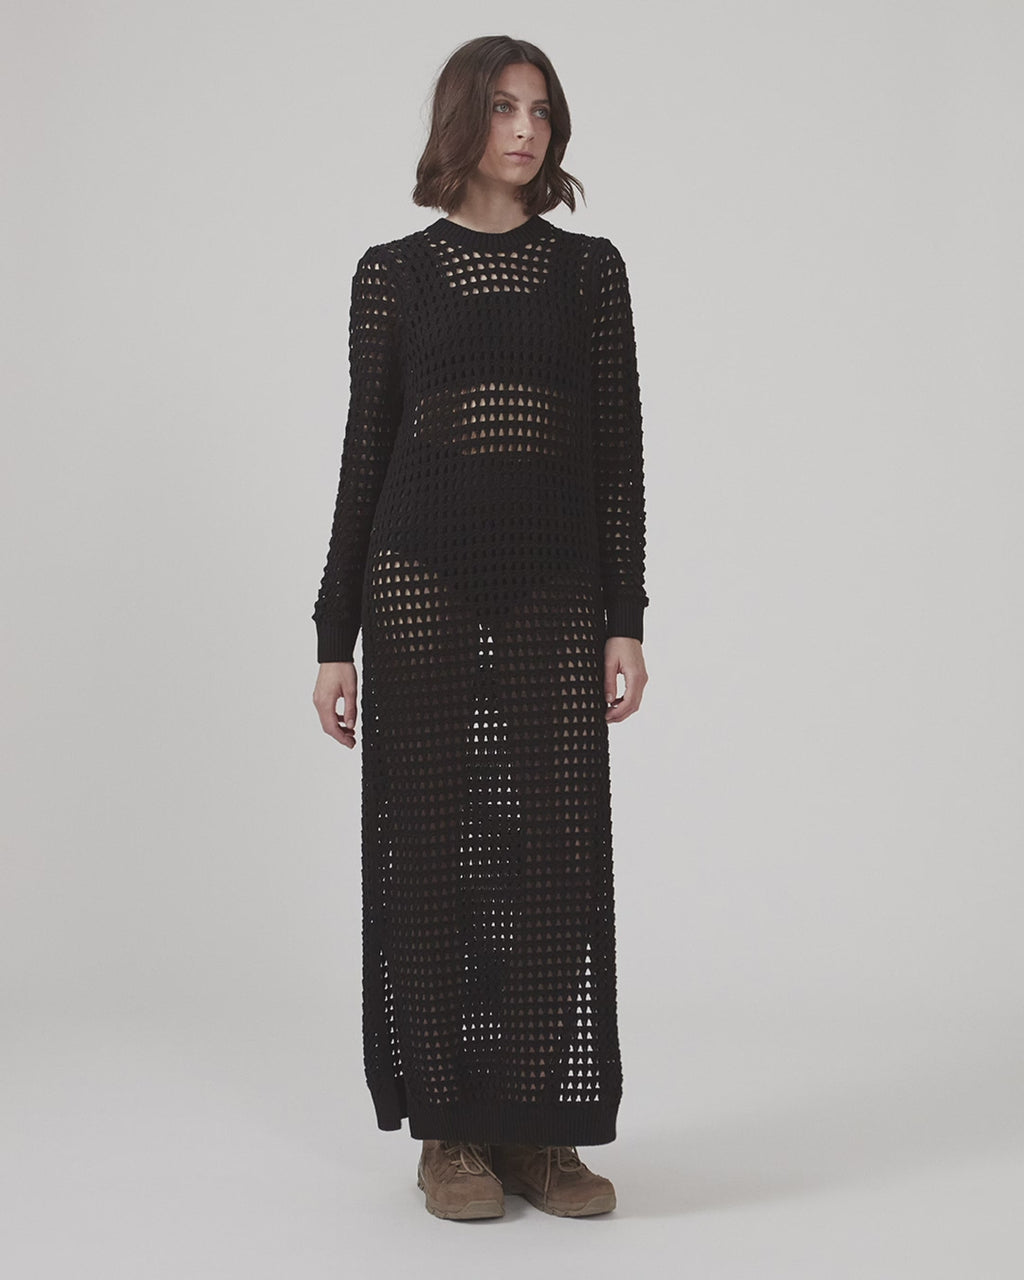 Maxi dress in organic cotton with a crochet look. CamdenMD dress with a relaxed fit, long sleeves, and a round neckline with ribbed trimmings.   The model is 177 cm and wears a size S/36.